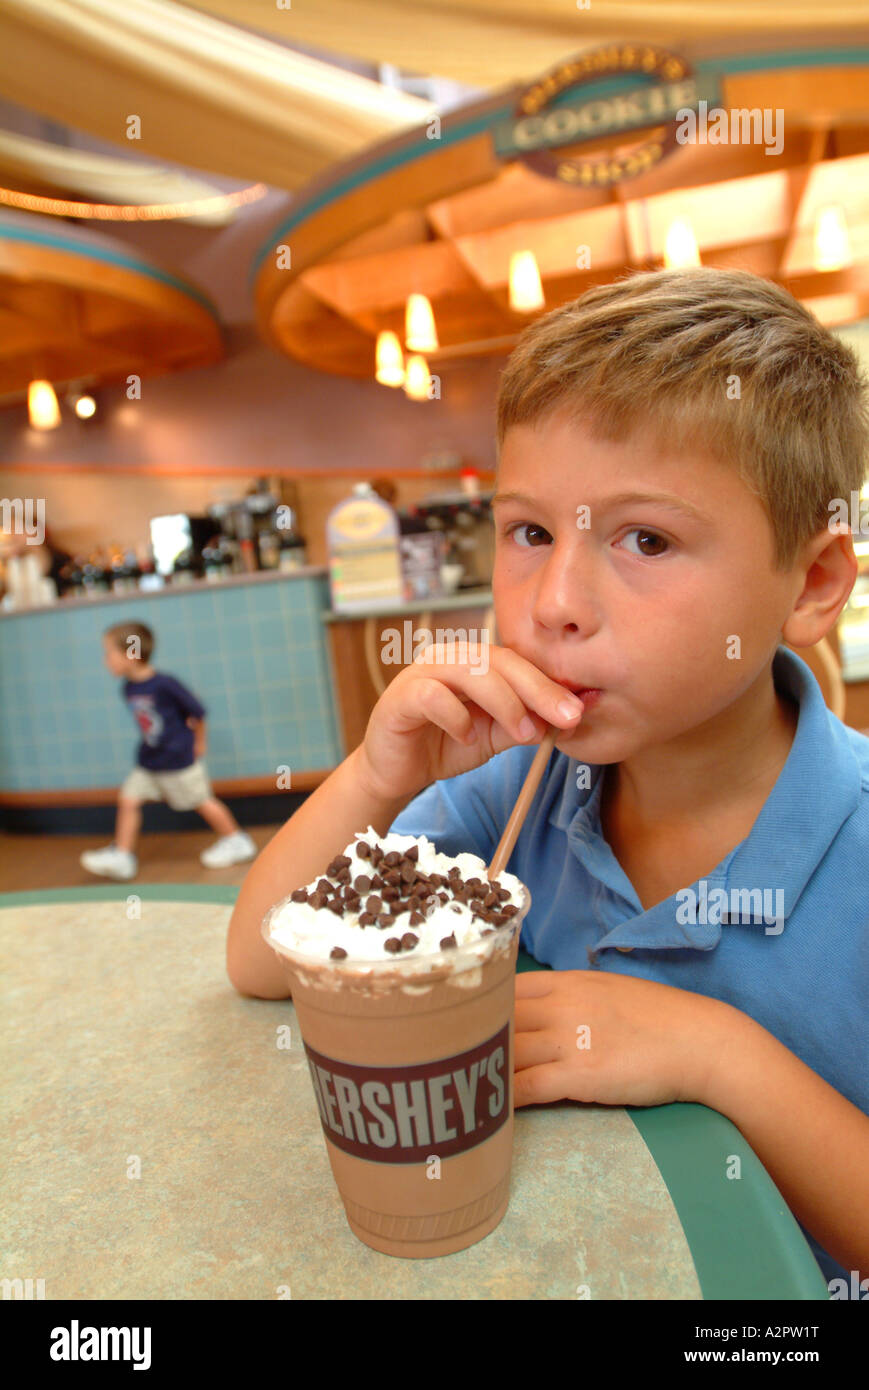 A boy seven 7 MR enjoys a chocolate iced drink at Hershey s Chocolate World cafe Stock Photo